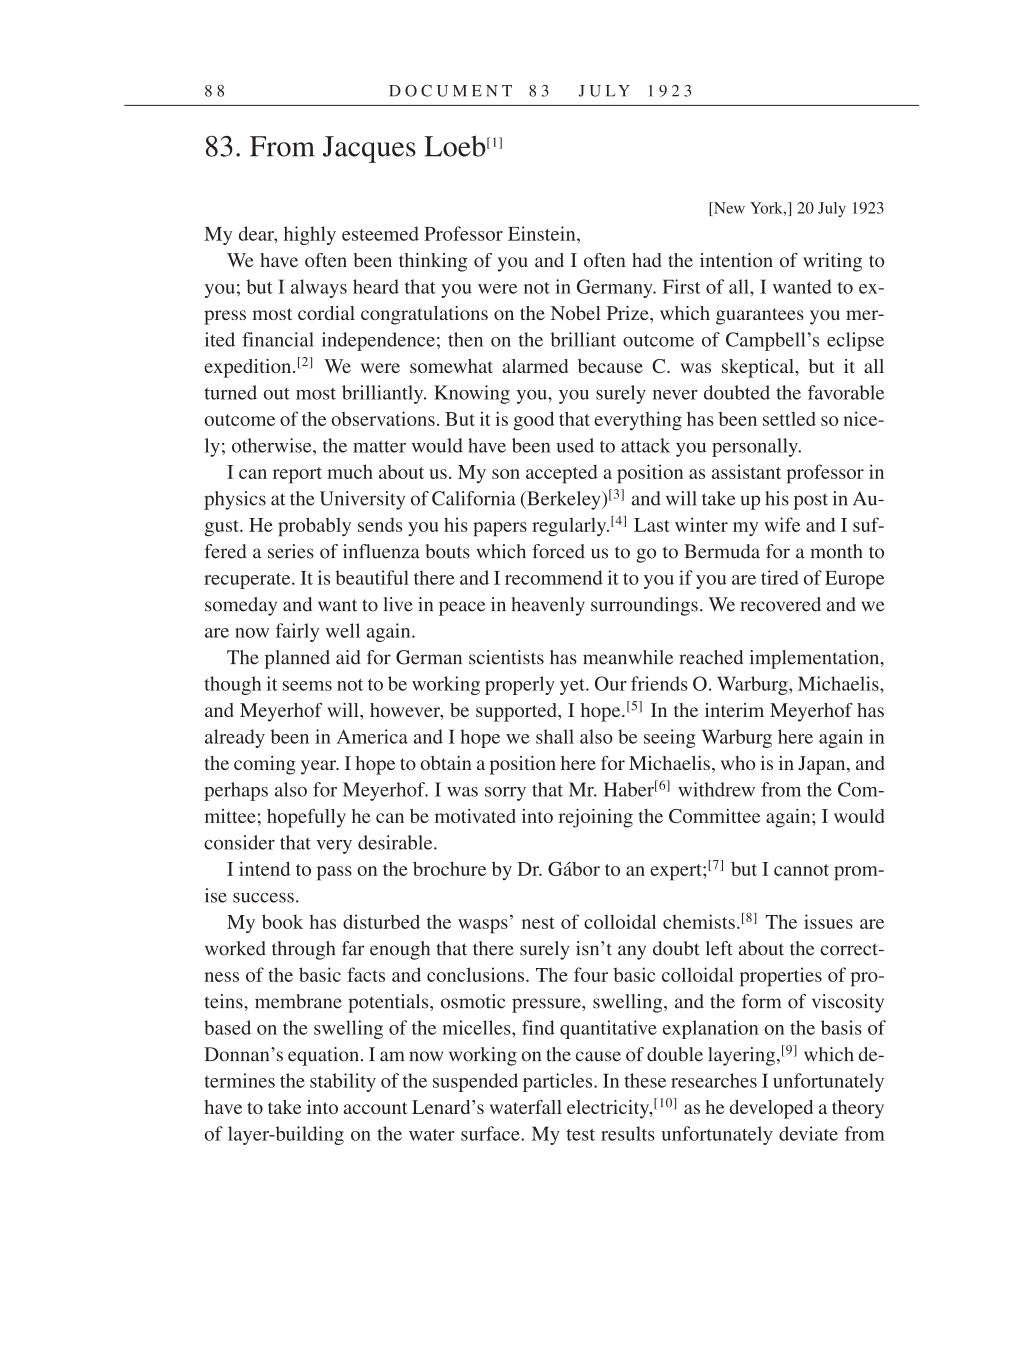 Volume 14: The Berlin Years: Writings & Correspondence, April 1923-May 1925 (English Translation Supplement) page 88